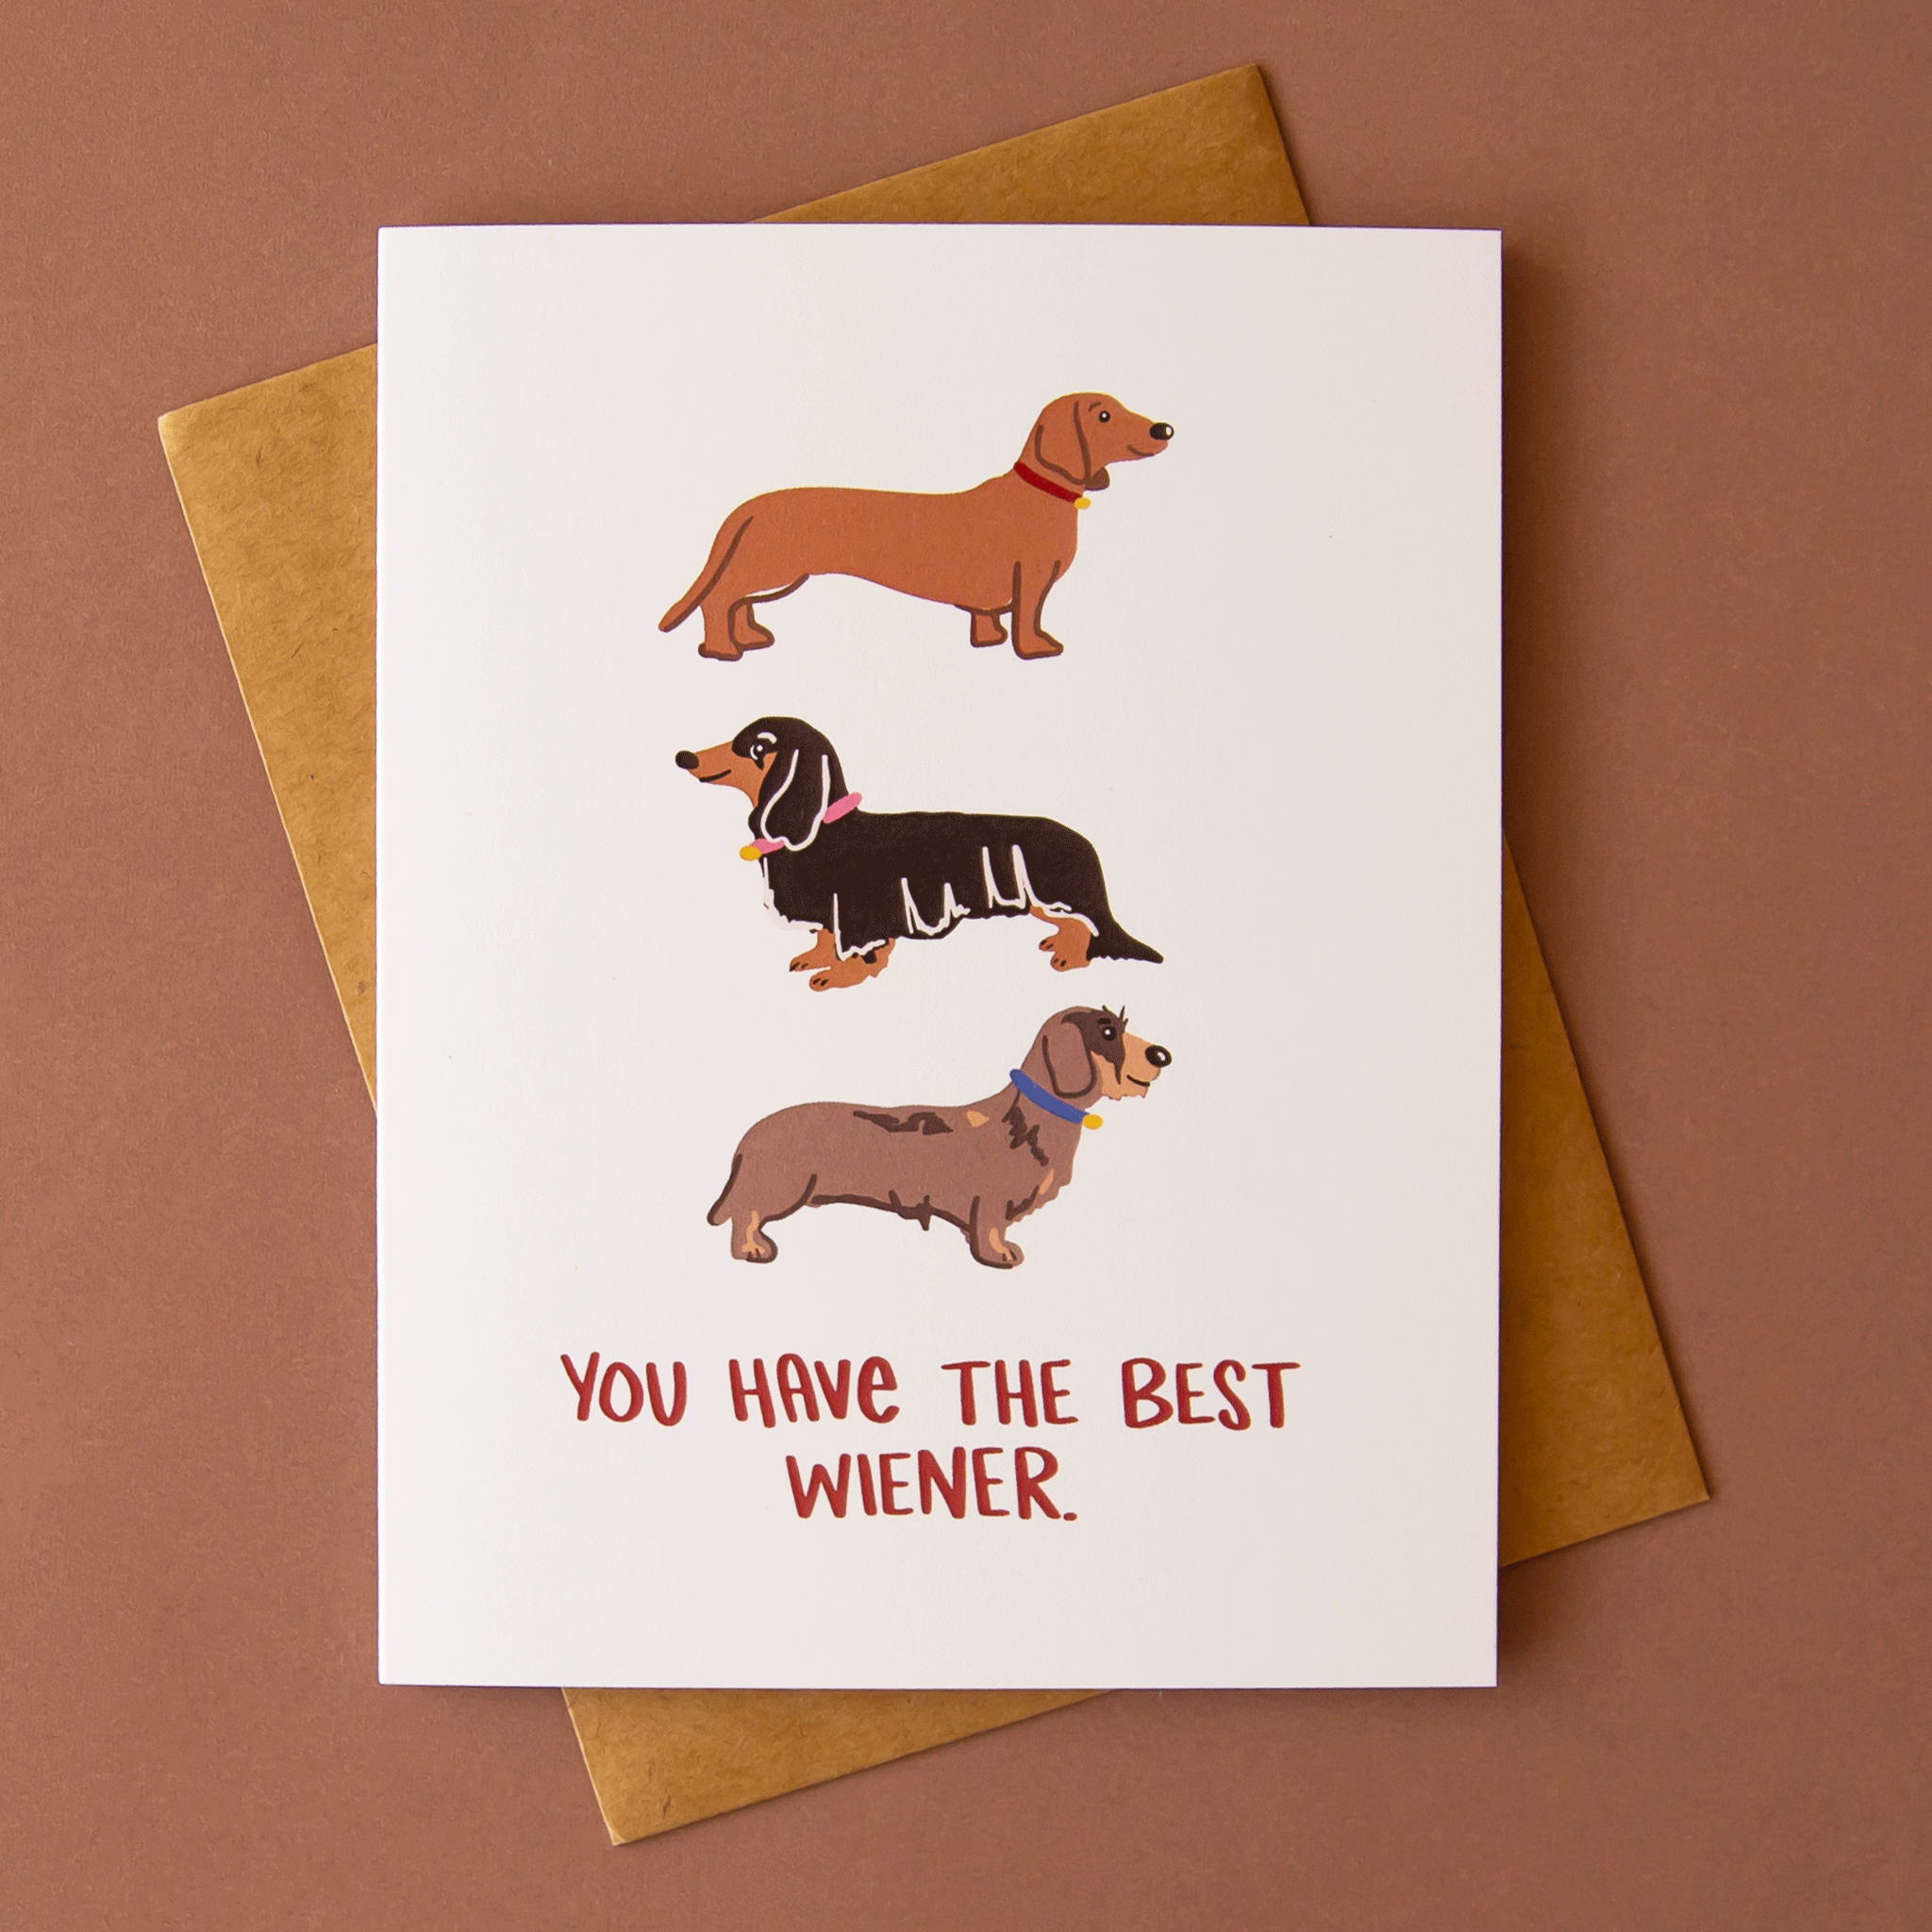 On a brown background is a white card with three different wiener dog illustrations with text on the bottom that reads, "You Have The Best Wiener.".